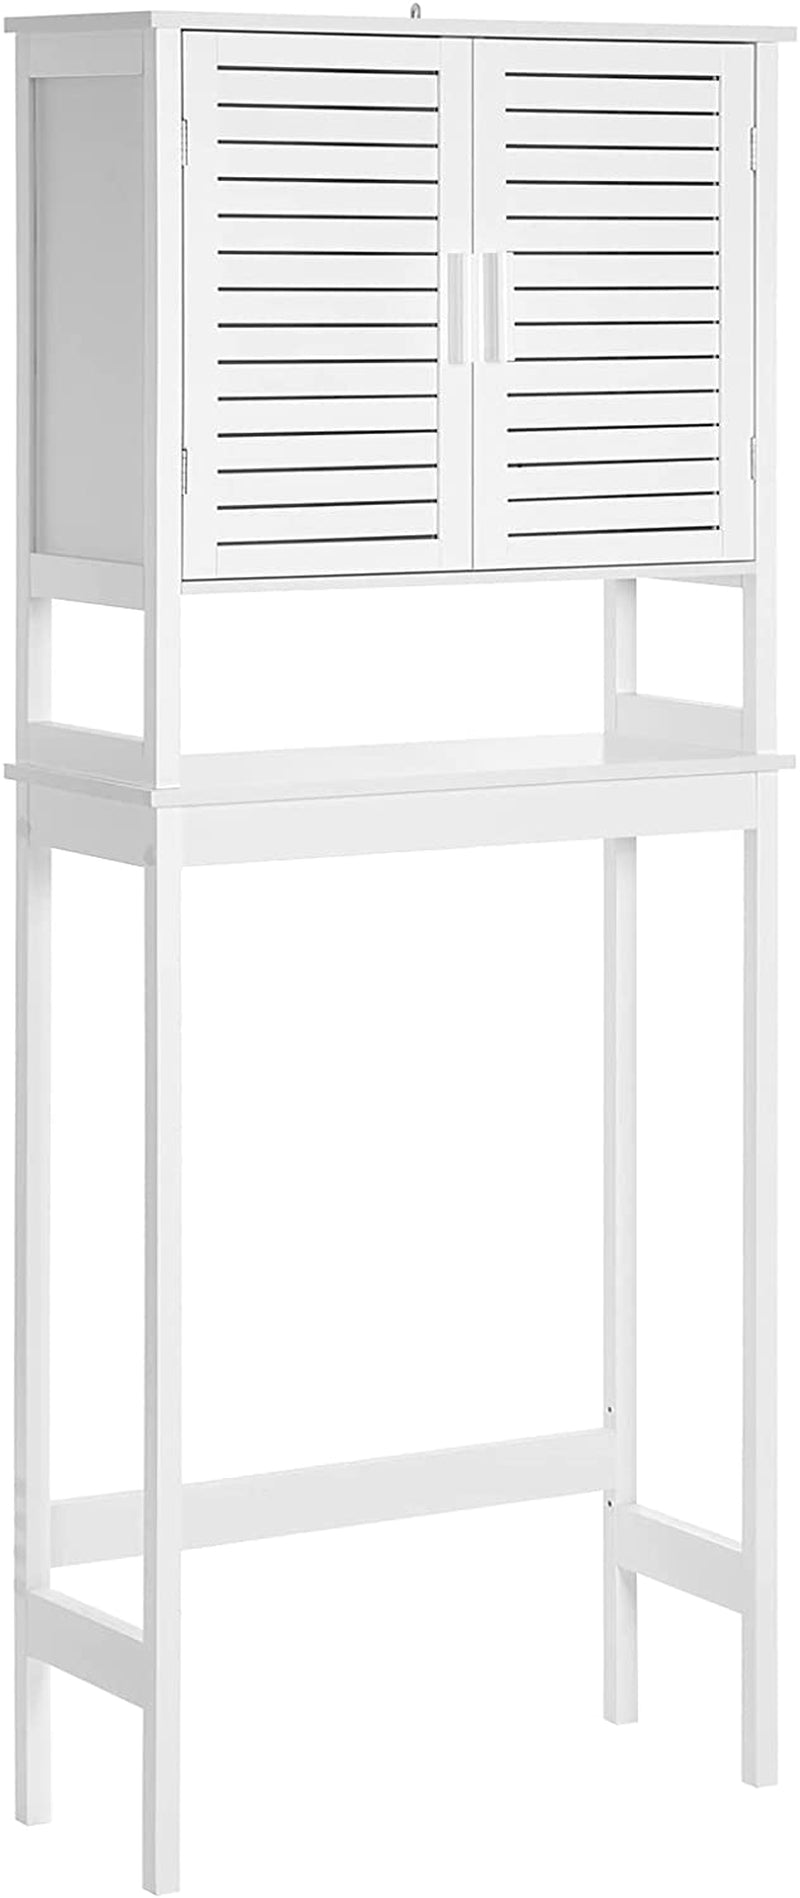 SONGMICS Over-The-Toilet Storage, Bathroom Cabinet with Adjustable inside Shelf and Bottom Stabilizer Bar, Space-Saving Toilet Rack, Natural UBTS010N01 Home & Garden > Household Supplies > Storage & Organization SONGMICS White  